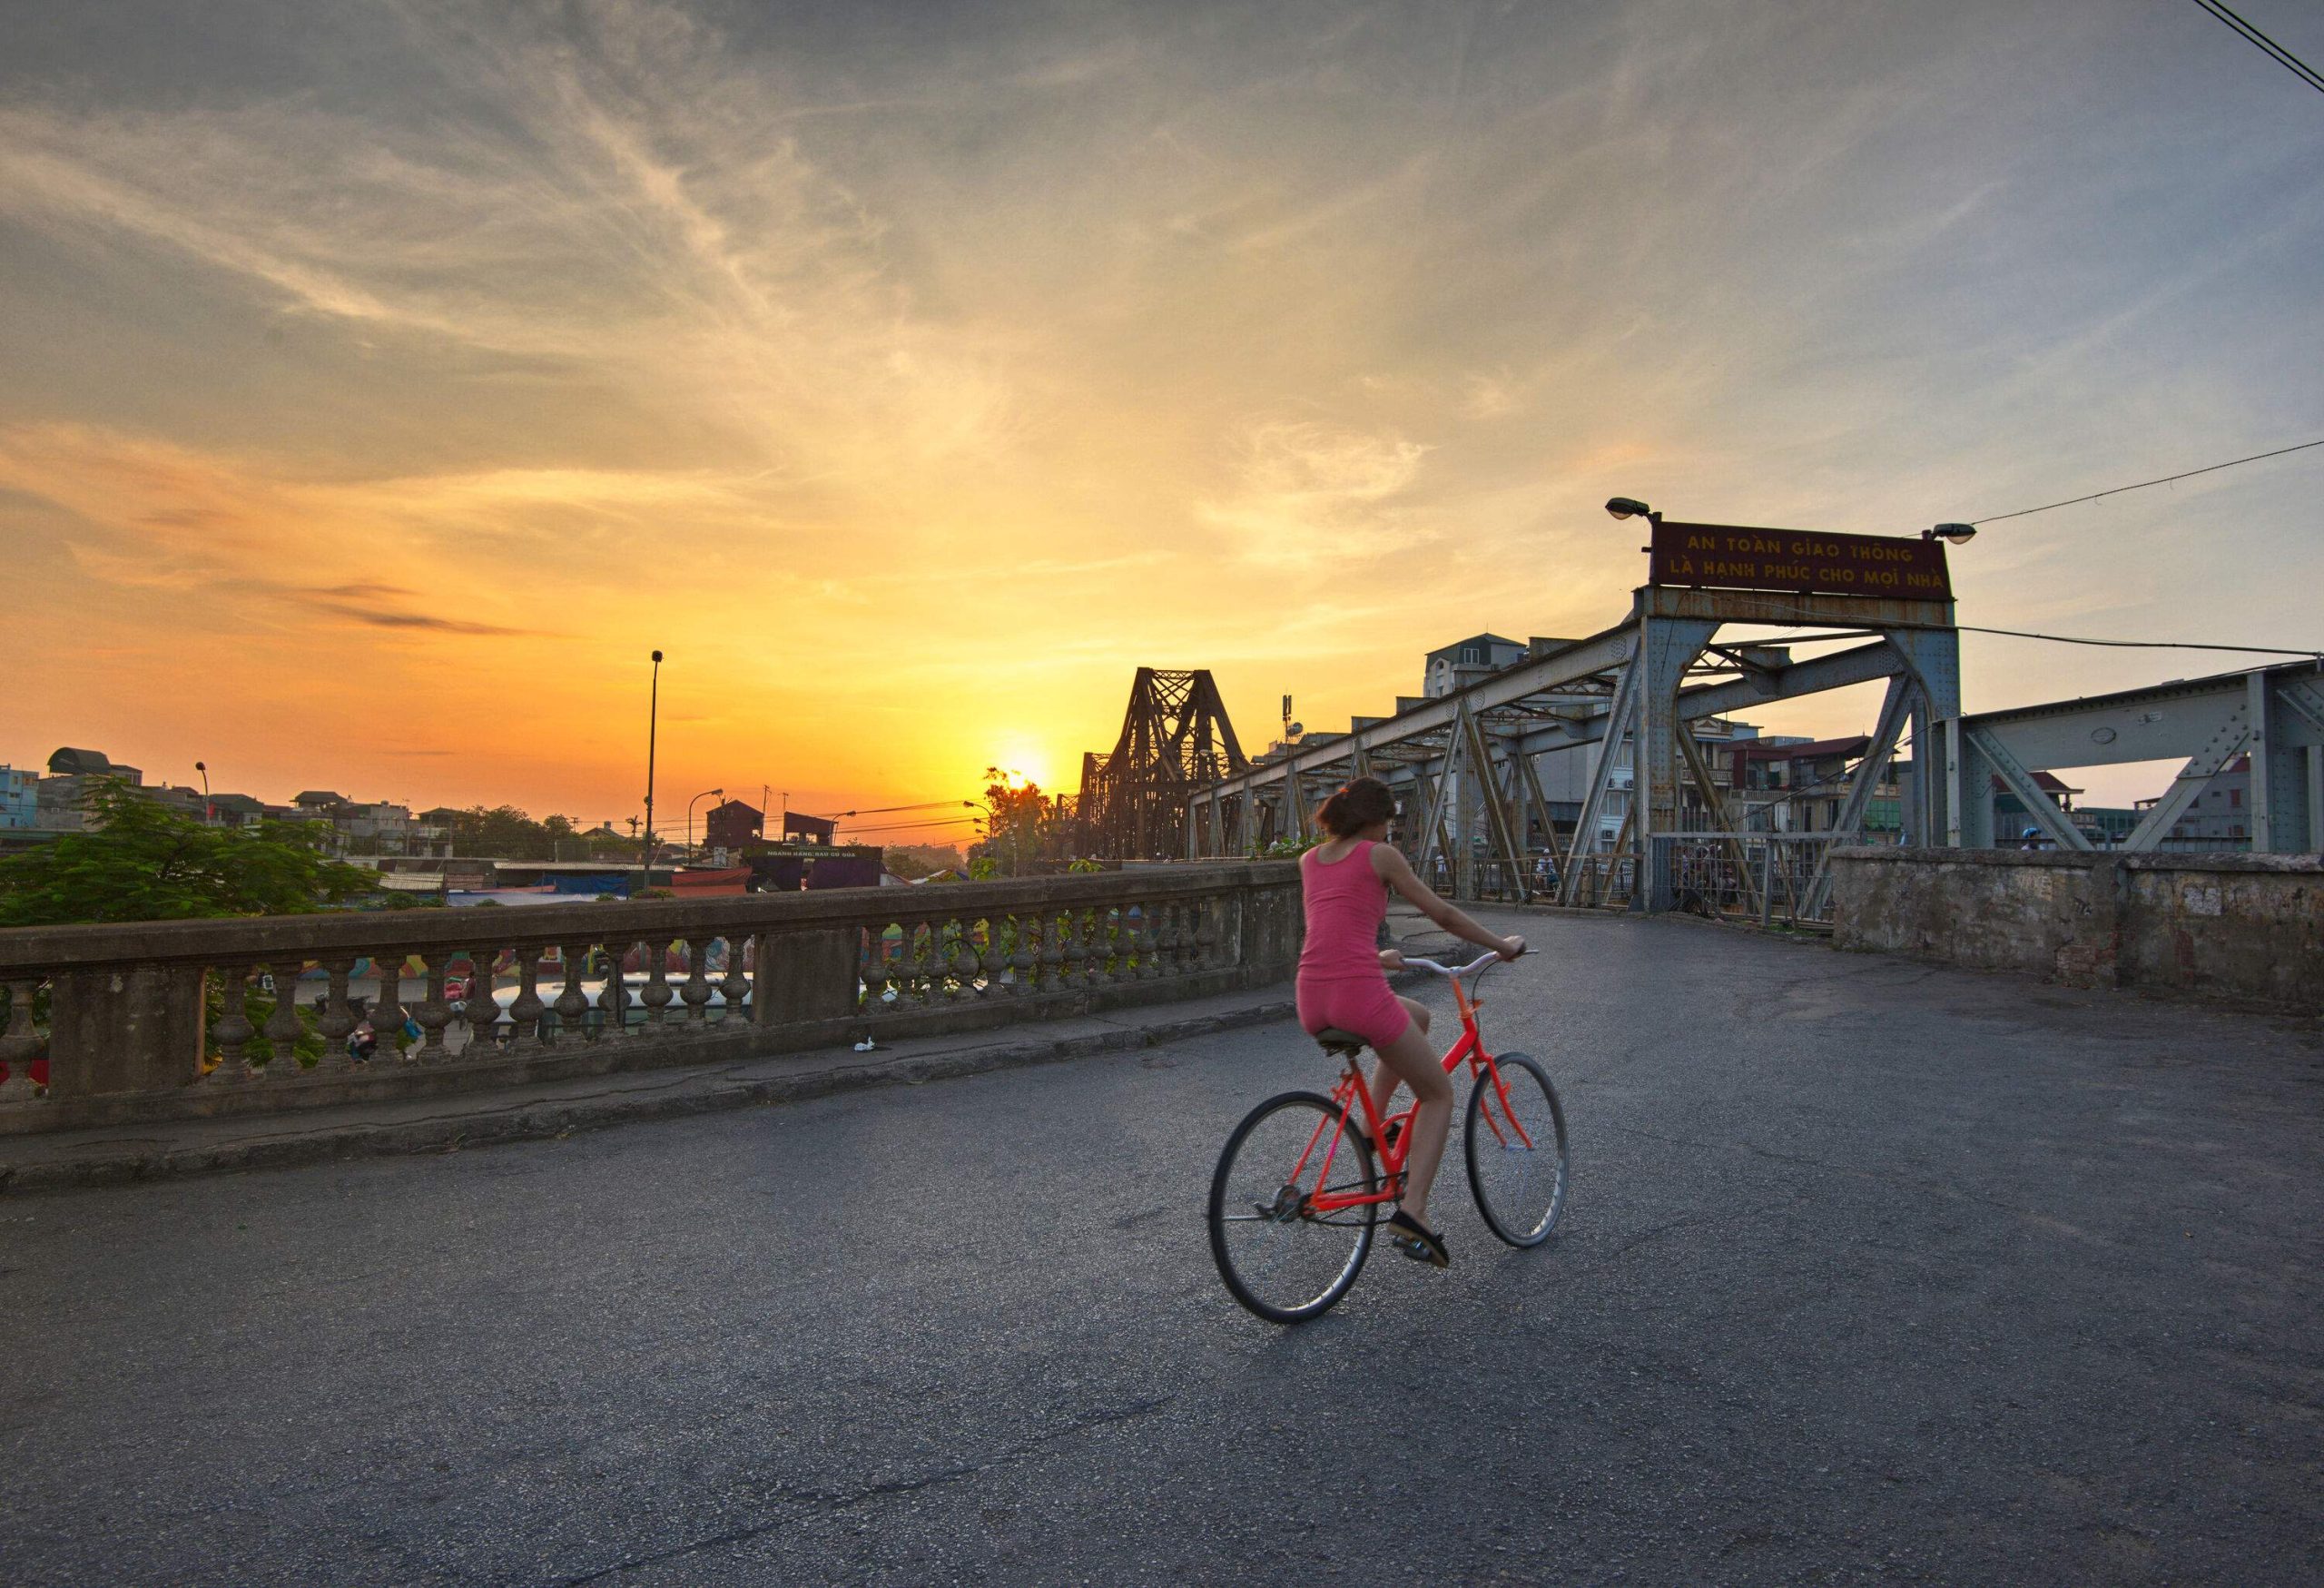 A woman rides a bicycle across a path beside a bridge with views of a beautiful sunset.